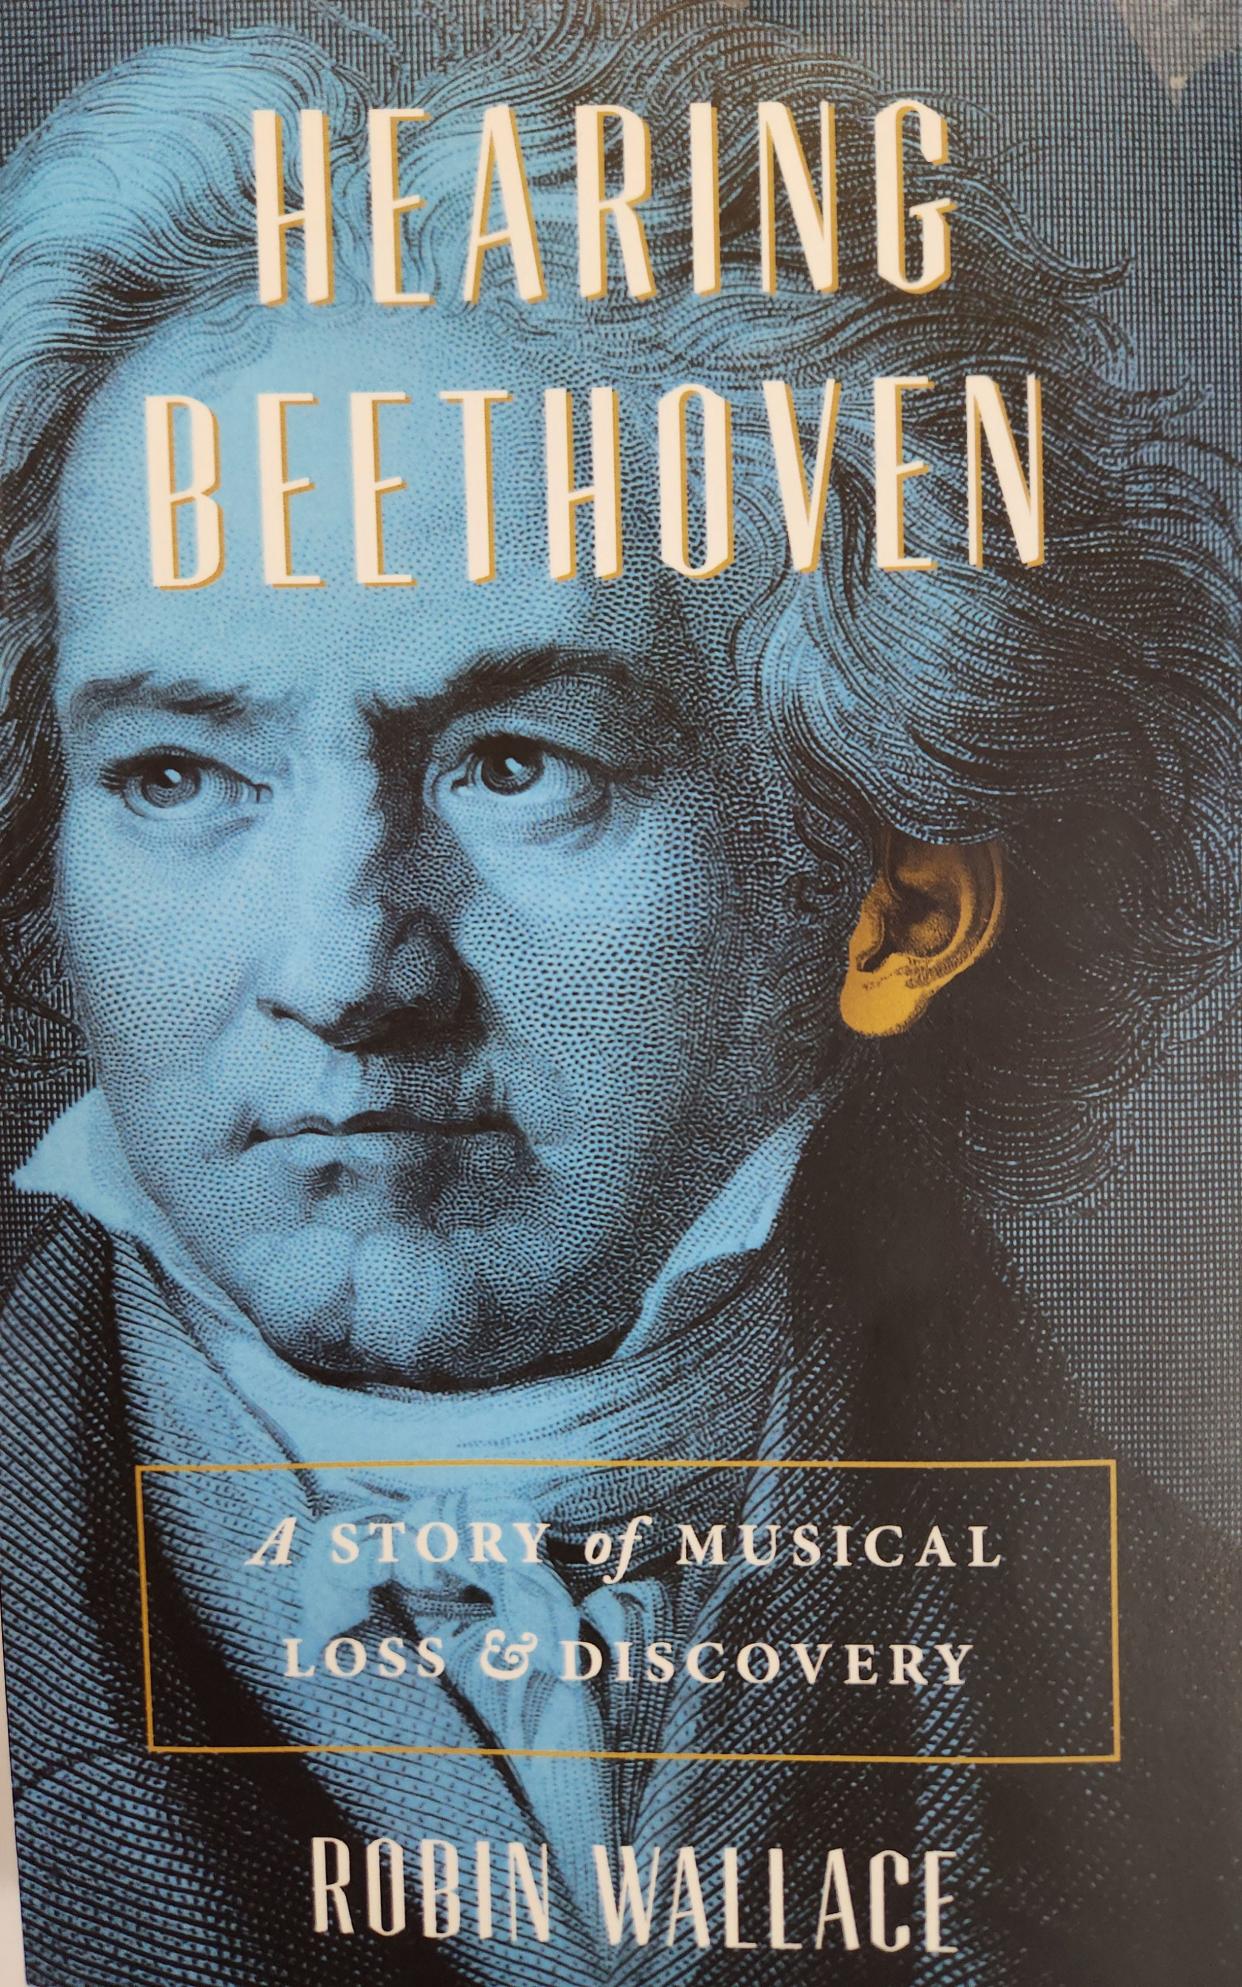 The cover of Robin Wallace's book, "Hearing Beethoven."